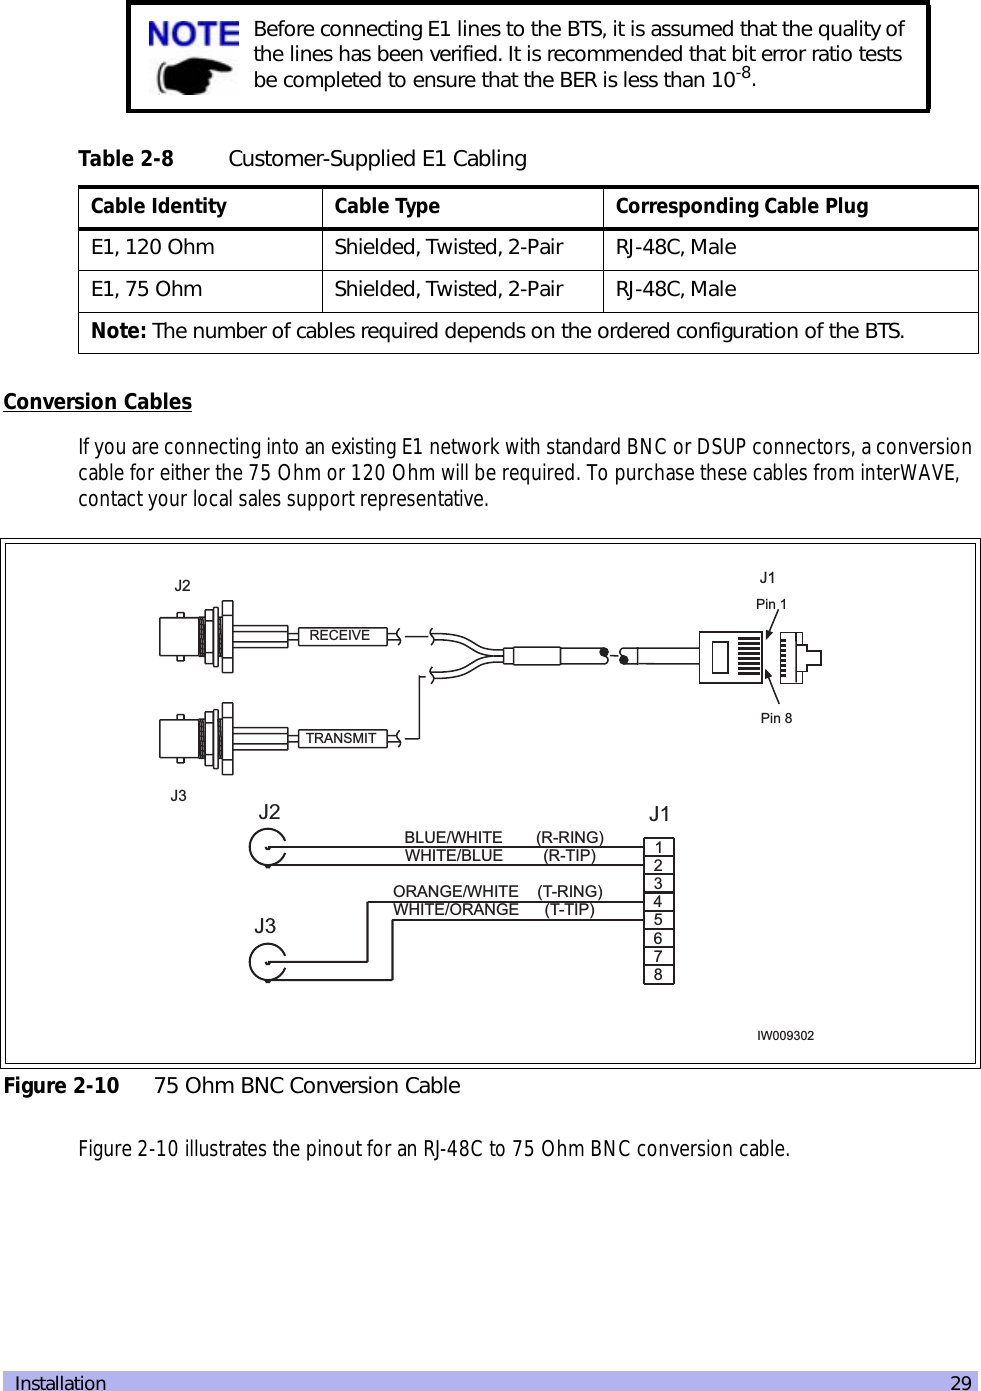  Installation 29Conversion CablesIf you are connecting into an existing E1 network with standard BNC or DSUP connectors, a conversion cable for either the 75 Ohm or 120 Ohm will be required. To purchase these cables from interWAVE, contact your local sales support representative. Figure 2-10 illustrates the pinout for an RJ-48C to 75 Ohm BNC conversion cable.Before connecting E1 lines to the BTS, it is assumed that the quality of the lines has been verified. It is recommended that bit error ratio tests be completed to ensure that the BER is less than 10-8.Table 2-8 Customer-Supplied E1 CablingCable Identity Cable Type Corresponding Cable PlugE1, 120 Ohm Shielded, Twisted, 2-Pair RJ-48C, MaleE1, 75 Ohm Shielded, Twisted, 2-Pair RJ-48C, MaleNote: The number of cables required depends on the ordered configuration of the BTS.Figure 2-10 75 Ohm BNC Conversion CableIW0093028ORANGE/WHITEBLUE/WHITEWHITE/ORANGEWHITE/BLUE (R-TIP)(R-RING)(T-TIP)(T-RING)1235674J2J3J1J2J3RECEIVETRANSMITPin 1Pin 8J1